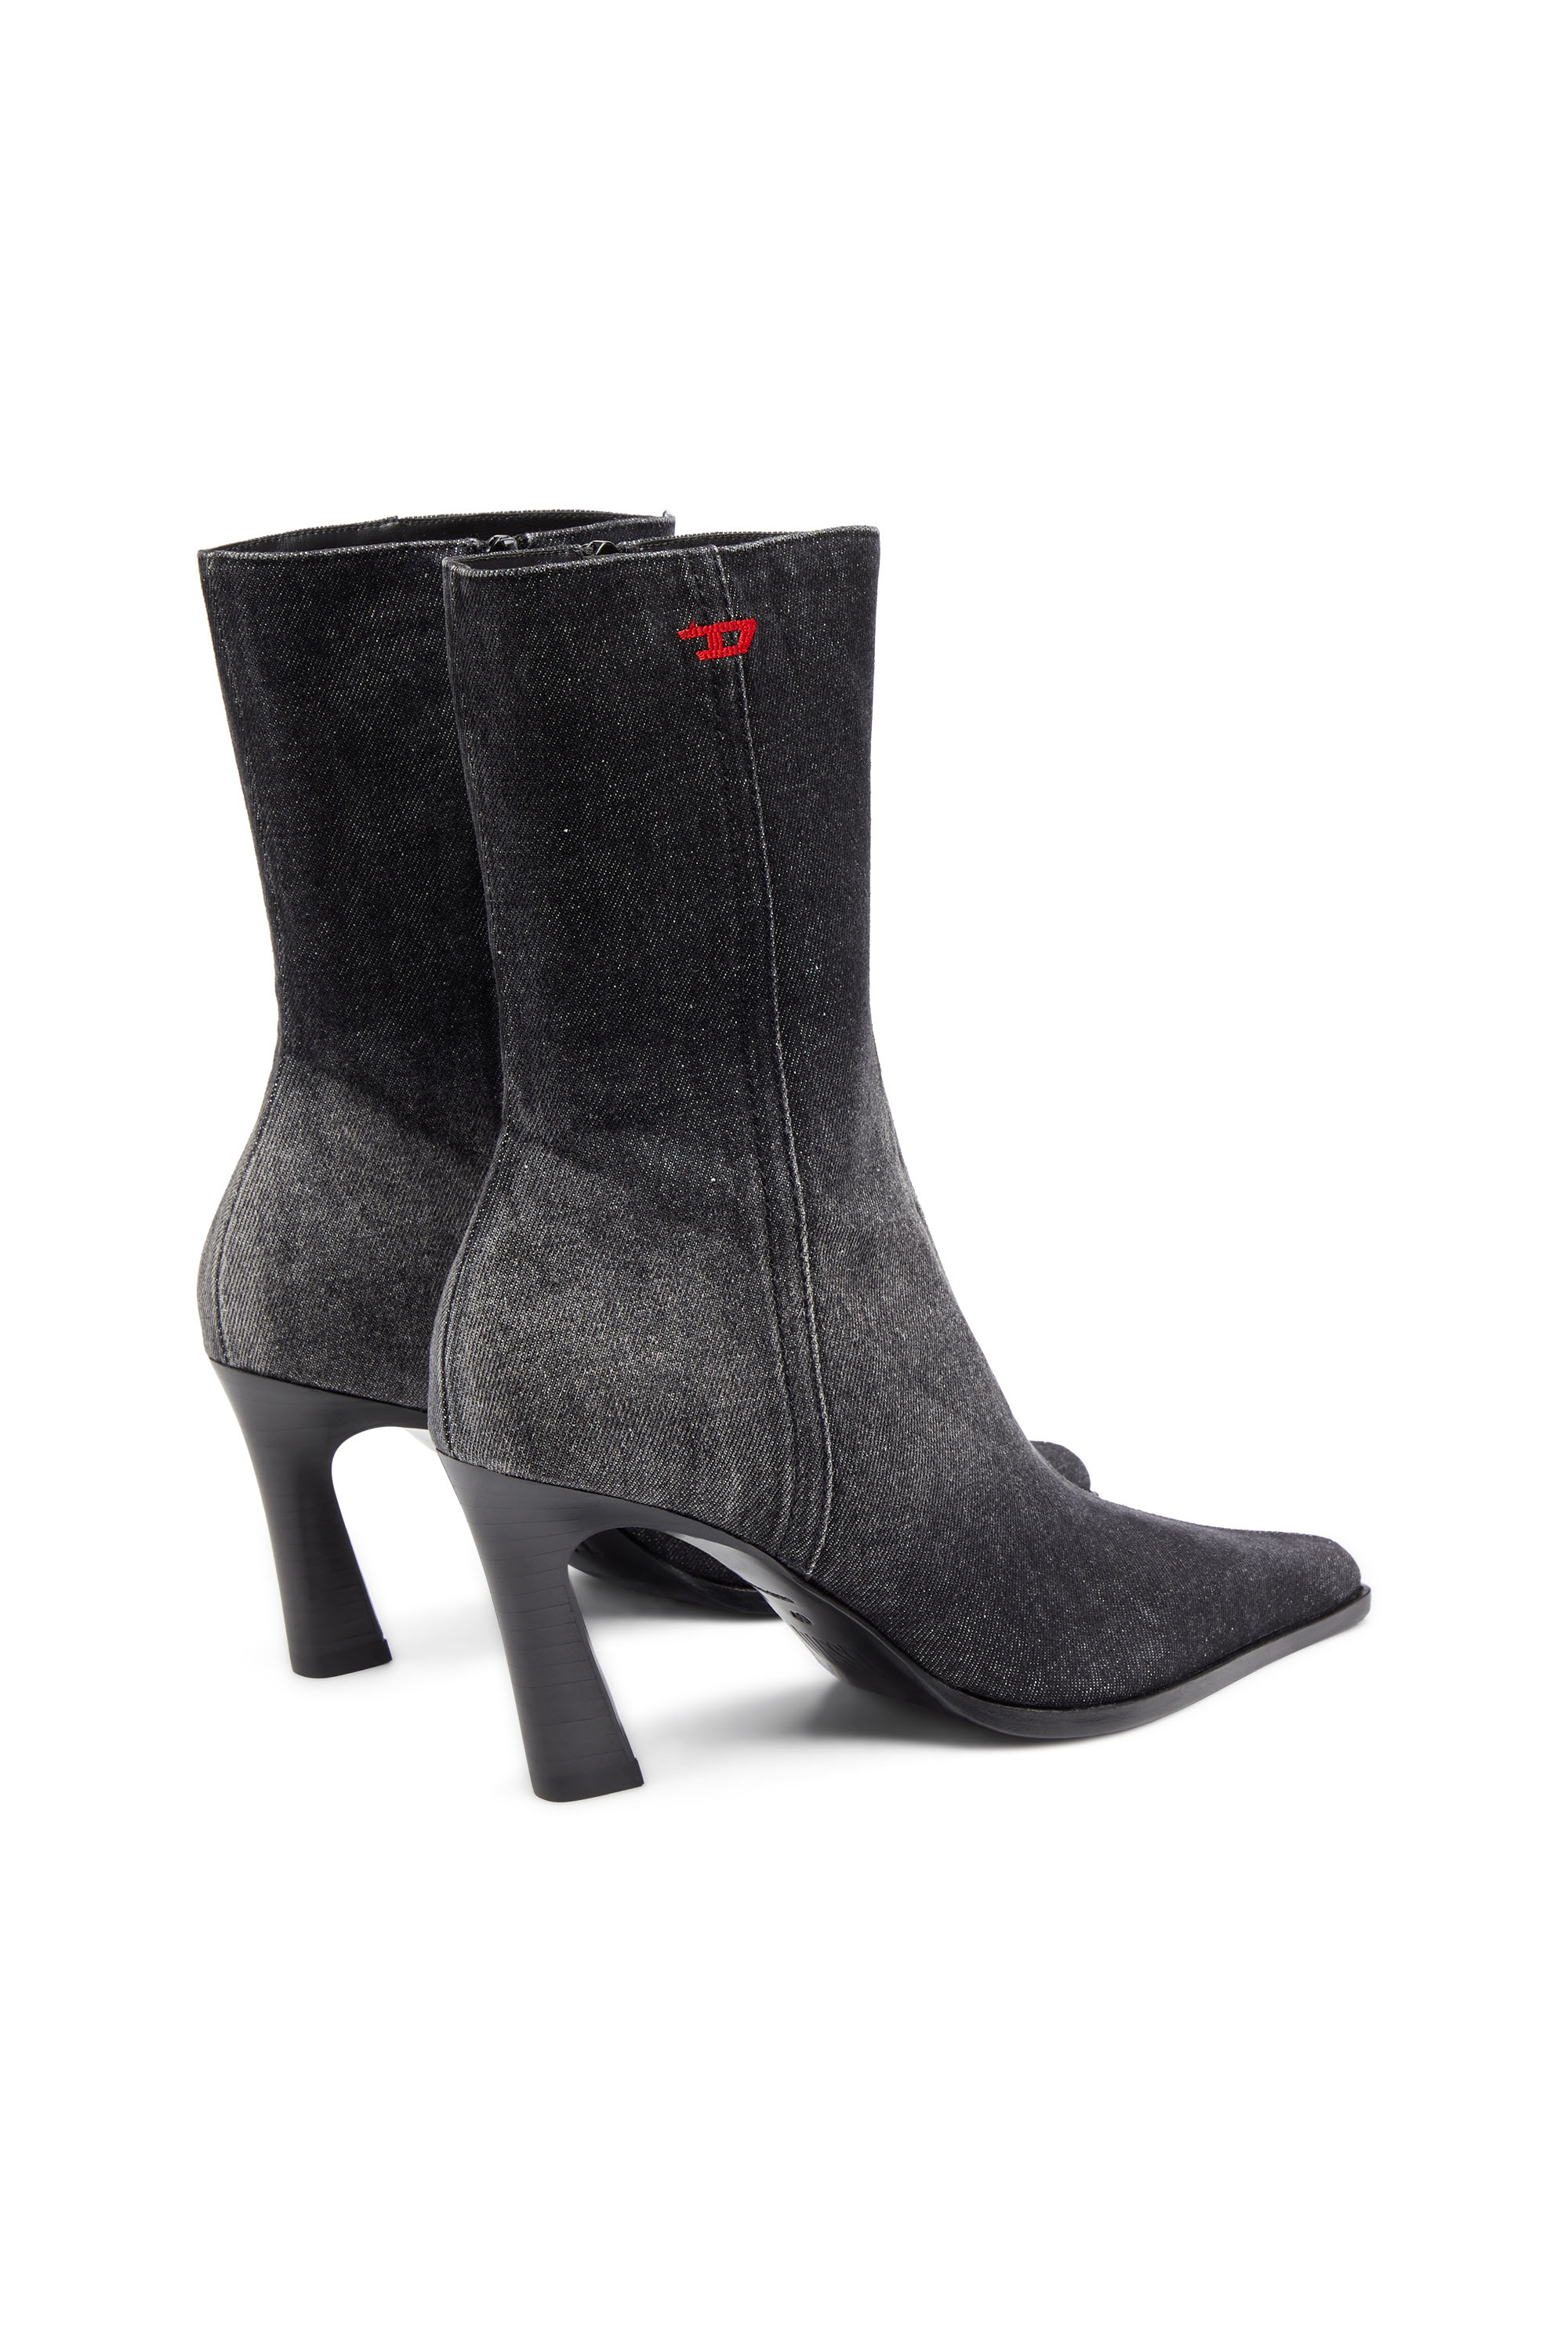 Women's Boots: High Heeled, Chelsea, Ankle Boots | Diesel®